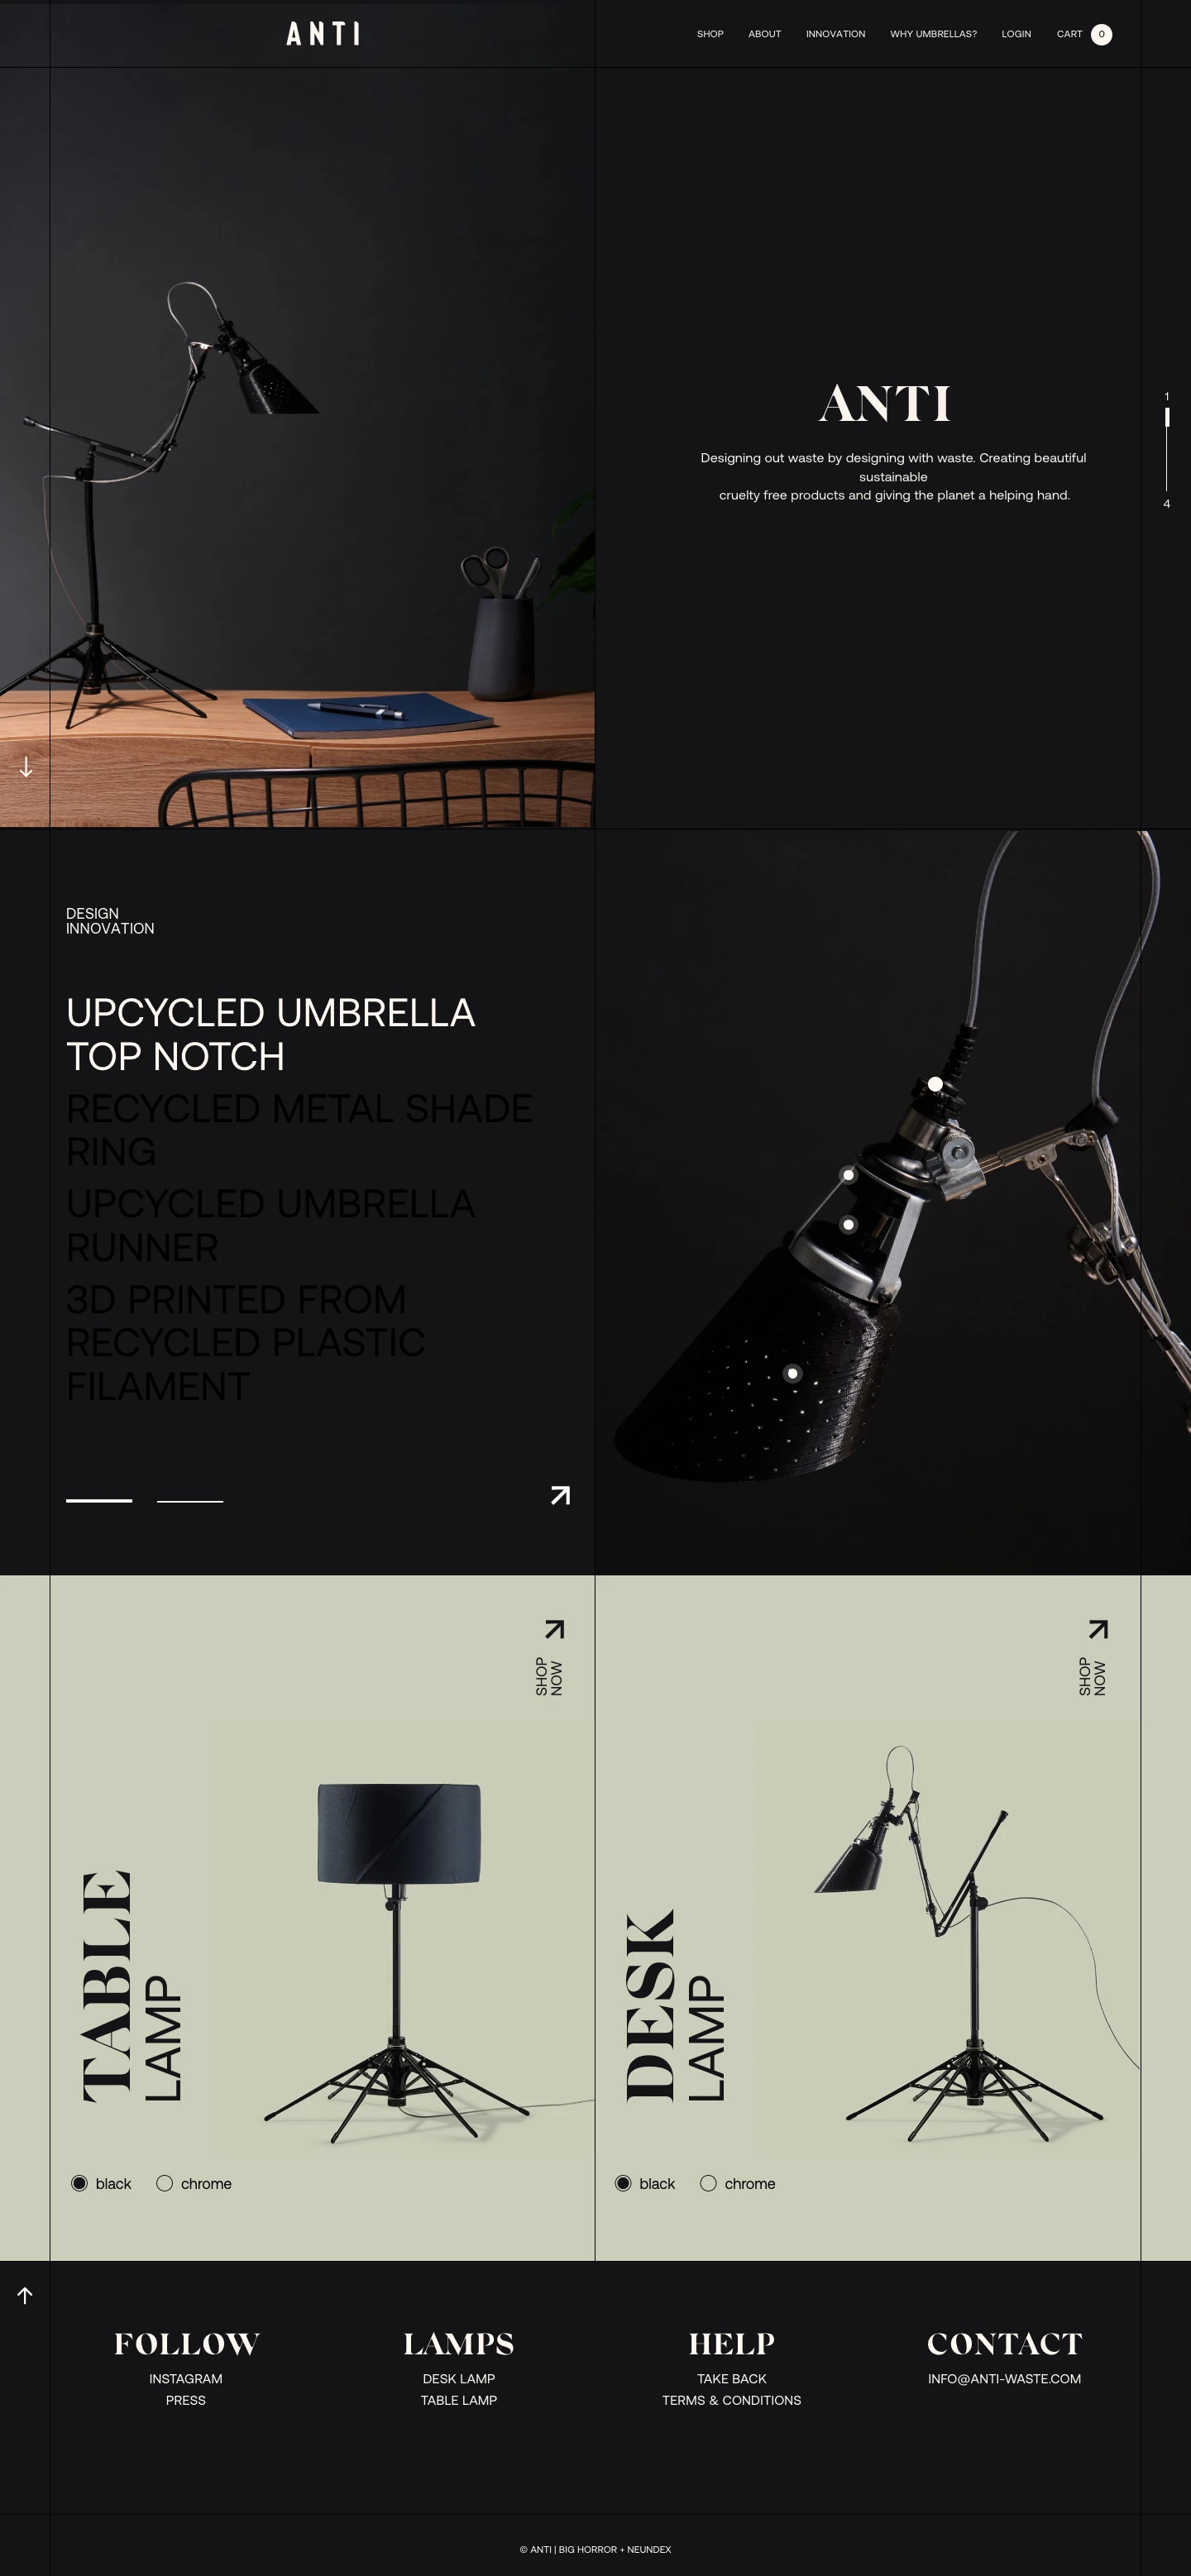 Anti Landing Page Example: Designing out waste by designing with waste. Creating beautiful sustainable cruelty free products and giving the planet a helping hand.